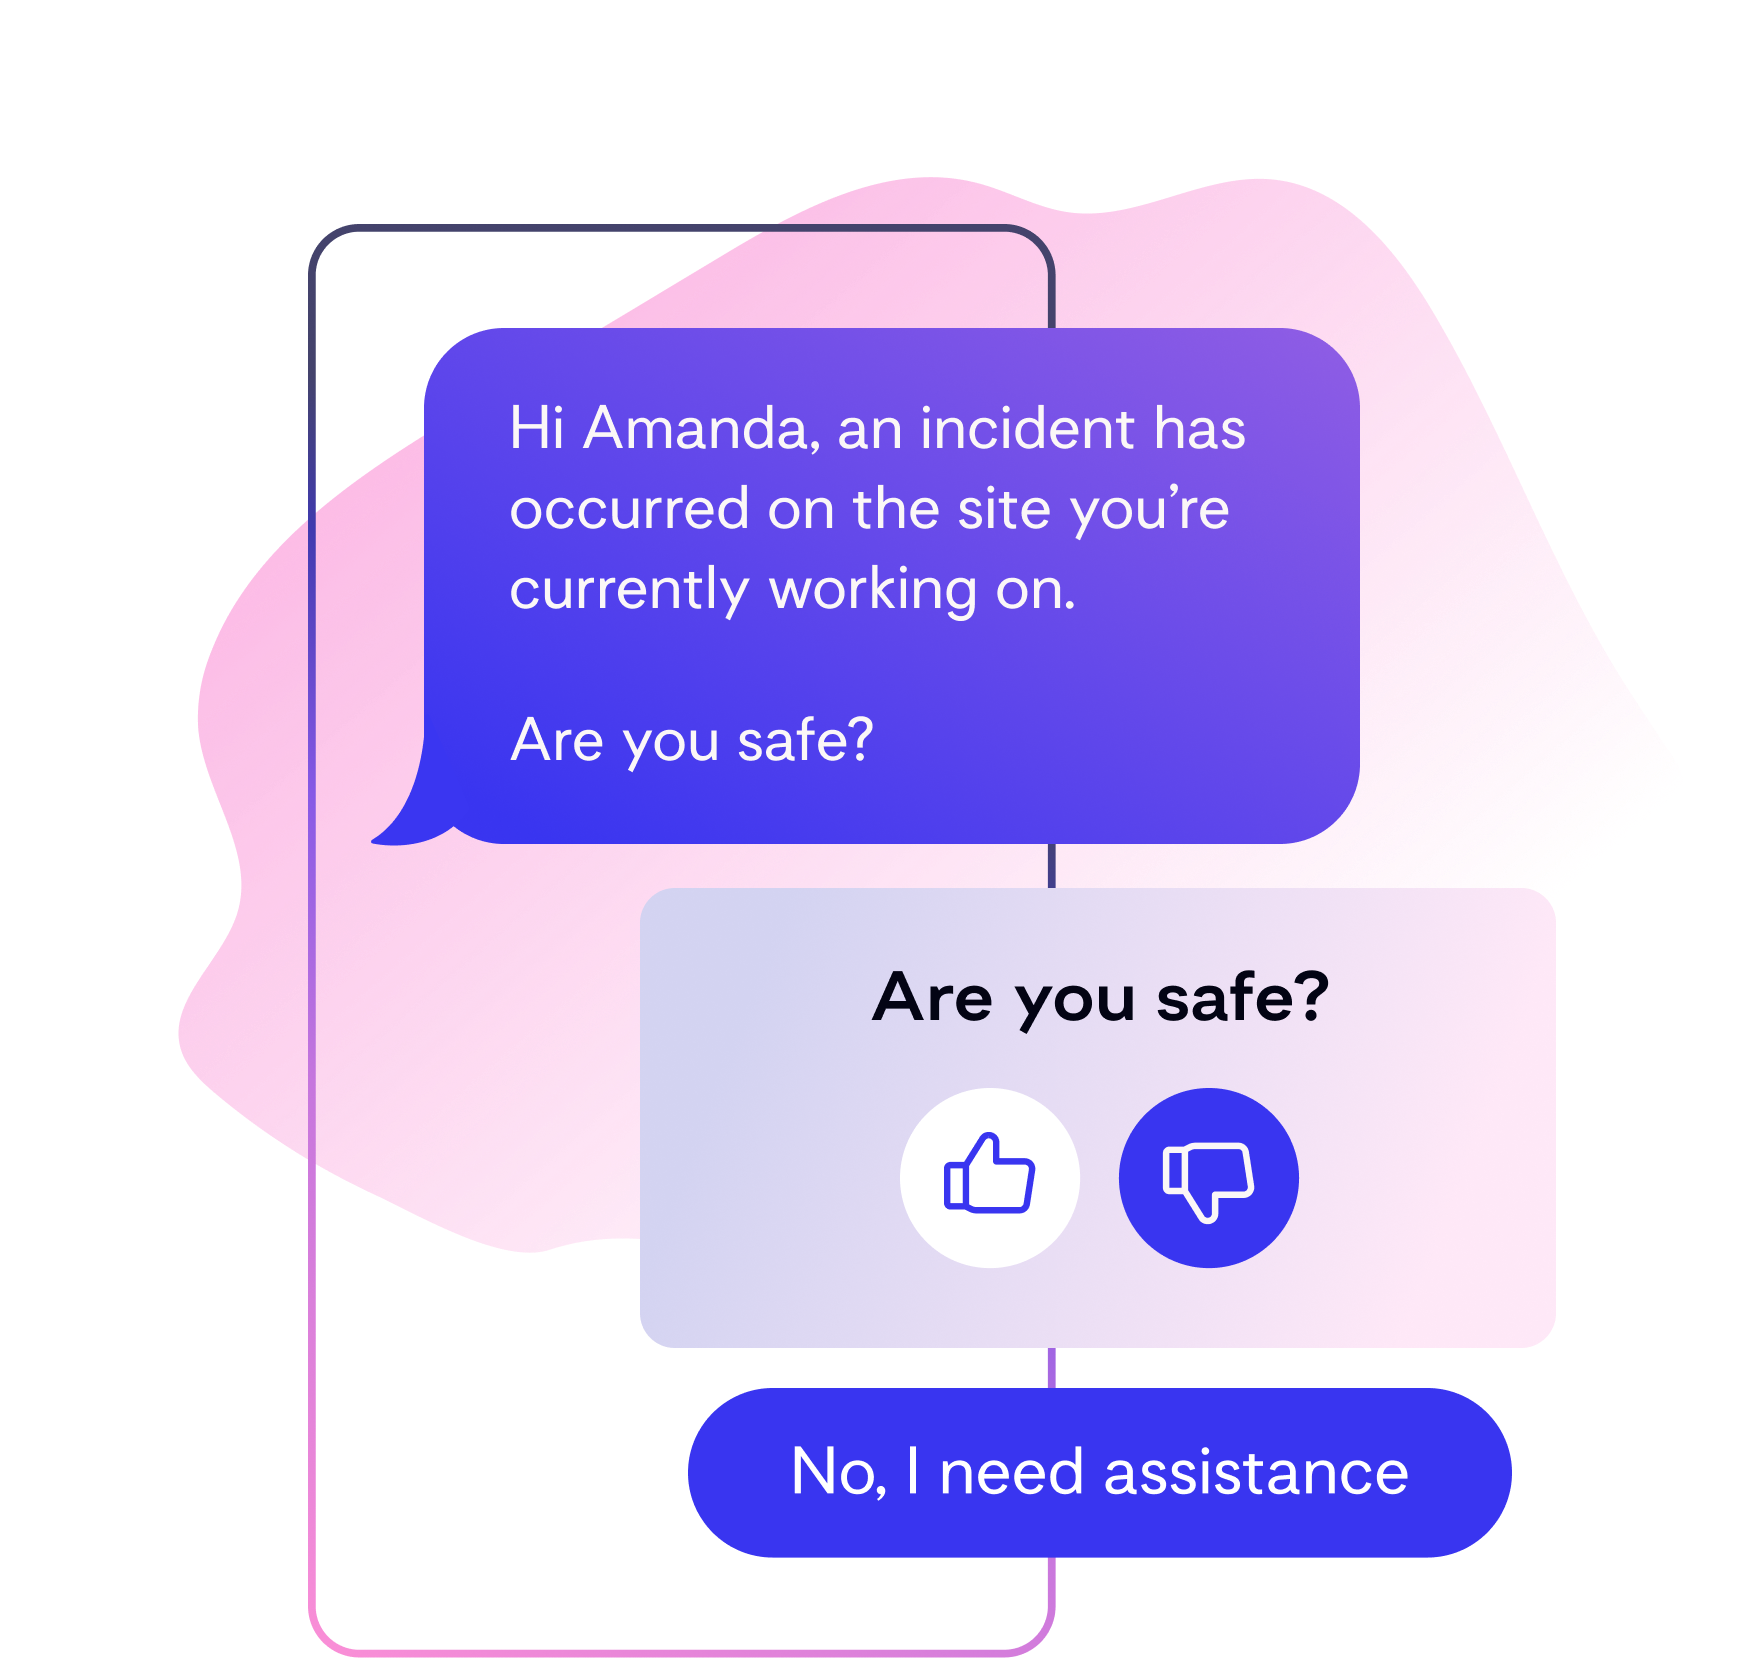 Two-way message capability asking if someone is safe with the option to provide a response